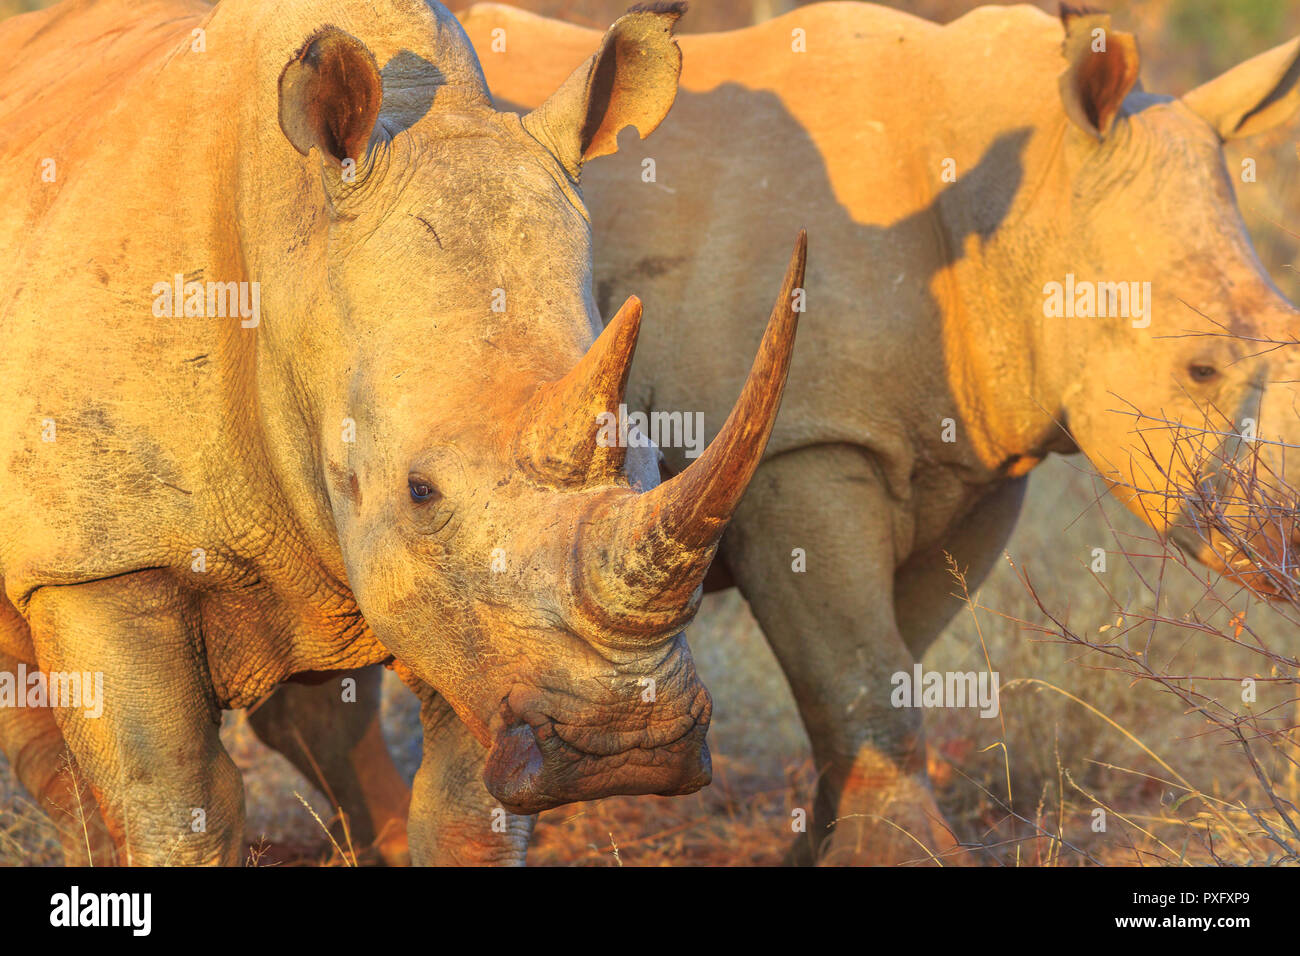 Detail of the horn of a White Rhinoceros, Ceratotherium simum, also called camouflage rhinoceros at sunset light standing in bushland habitat, South Africa. The Rhinos is part of Big Five. Stock Photo